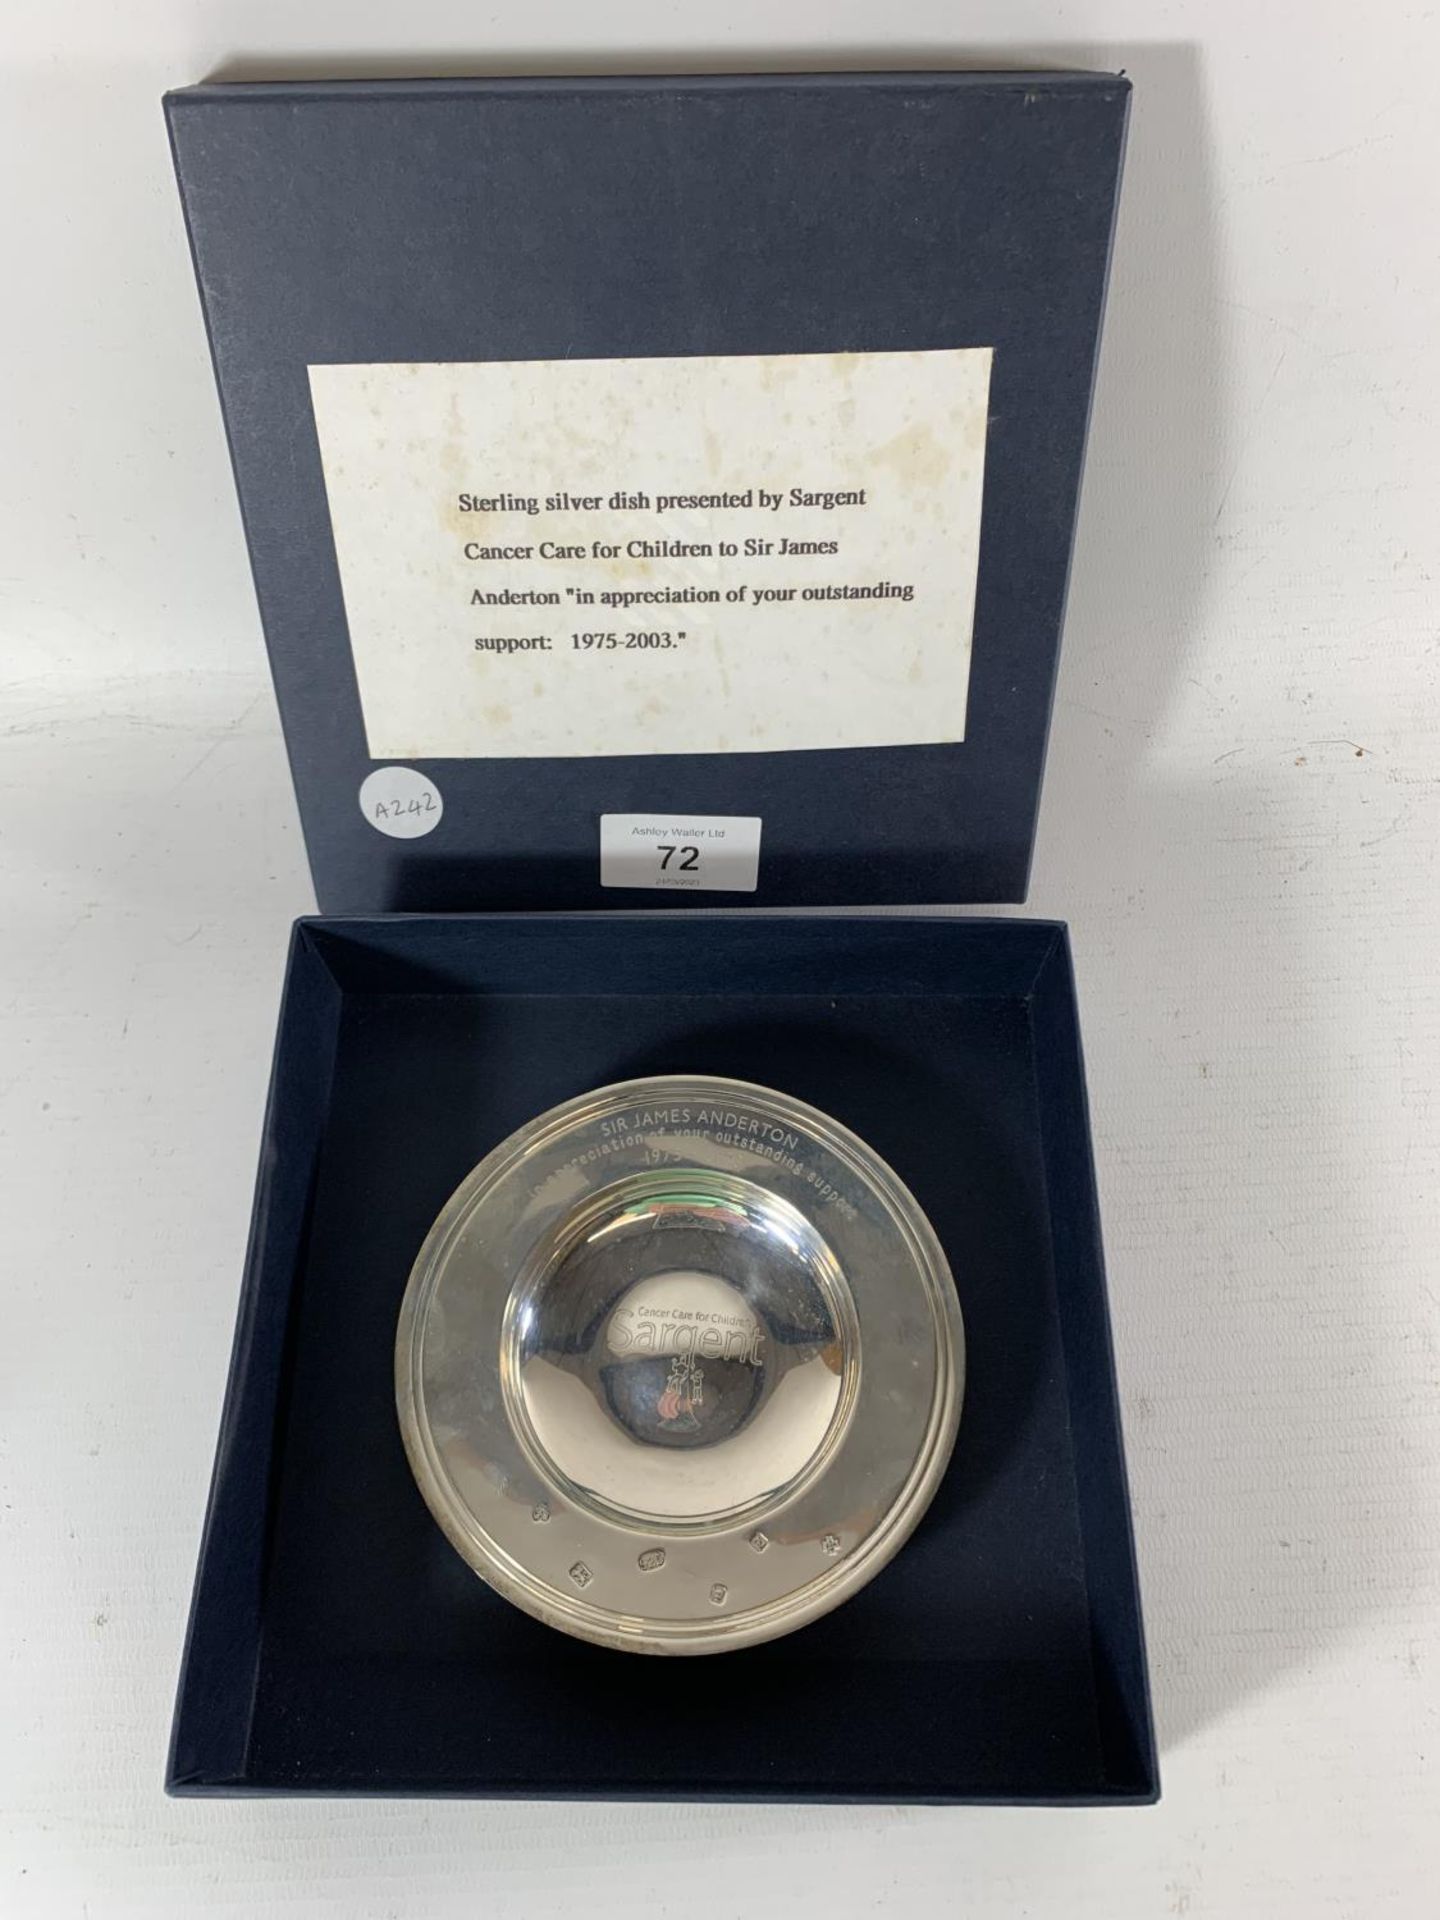 * A HALLMARKED SILVER PRESENTATION ARMADA DISH, PRESENTED BY CANCER CARE FOR CHILDREN 2003, LONDON